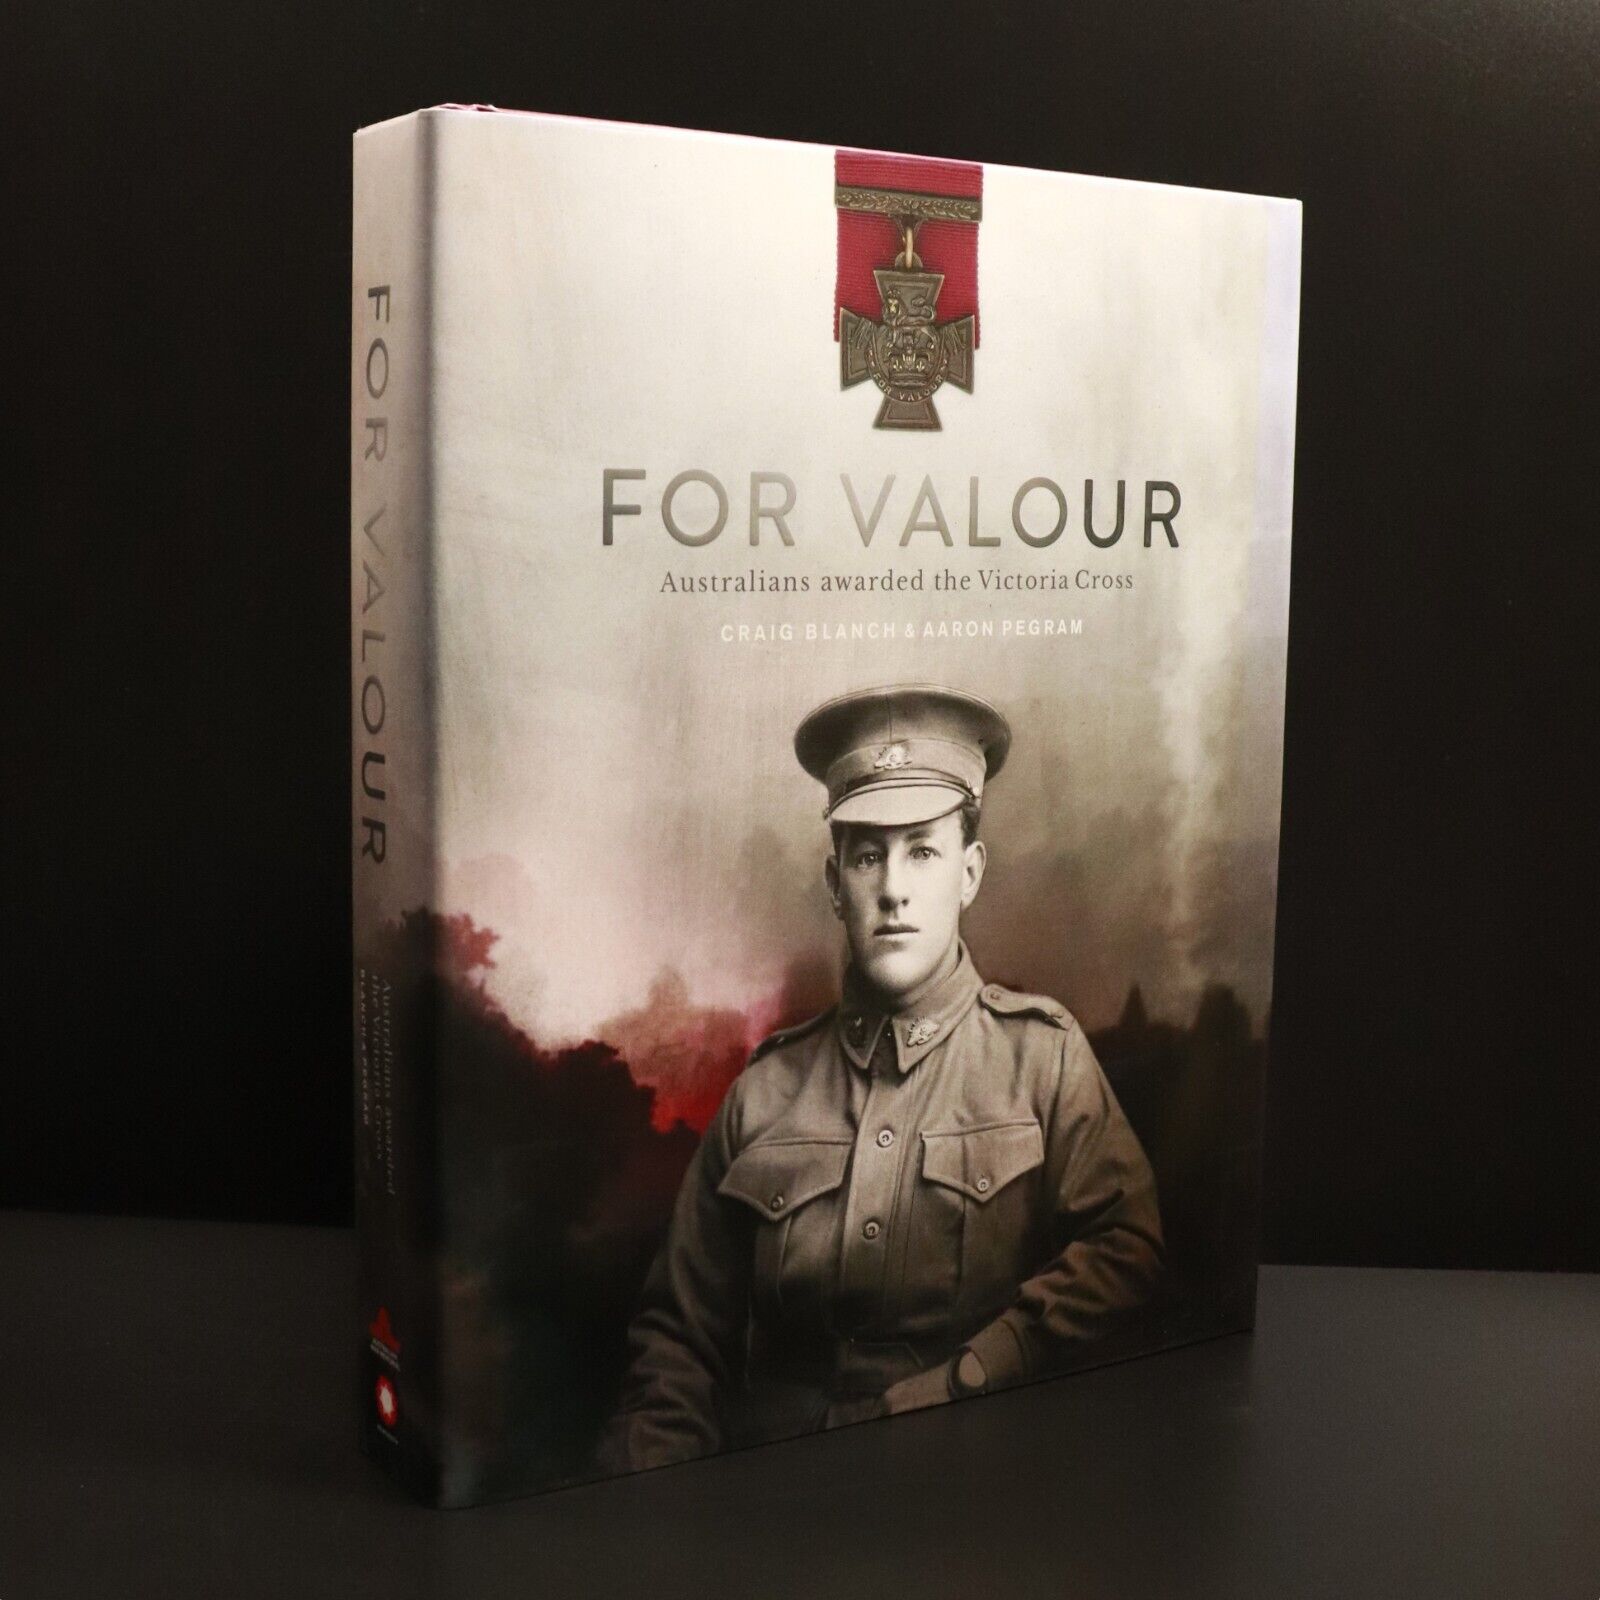 2018 For Valour Australians & Victoria Cross by C. Blanch Military History Book